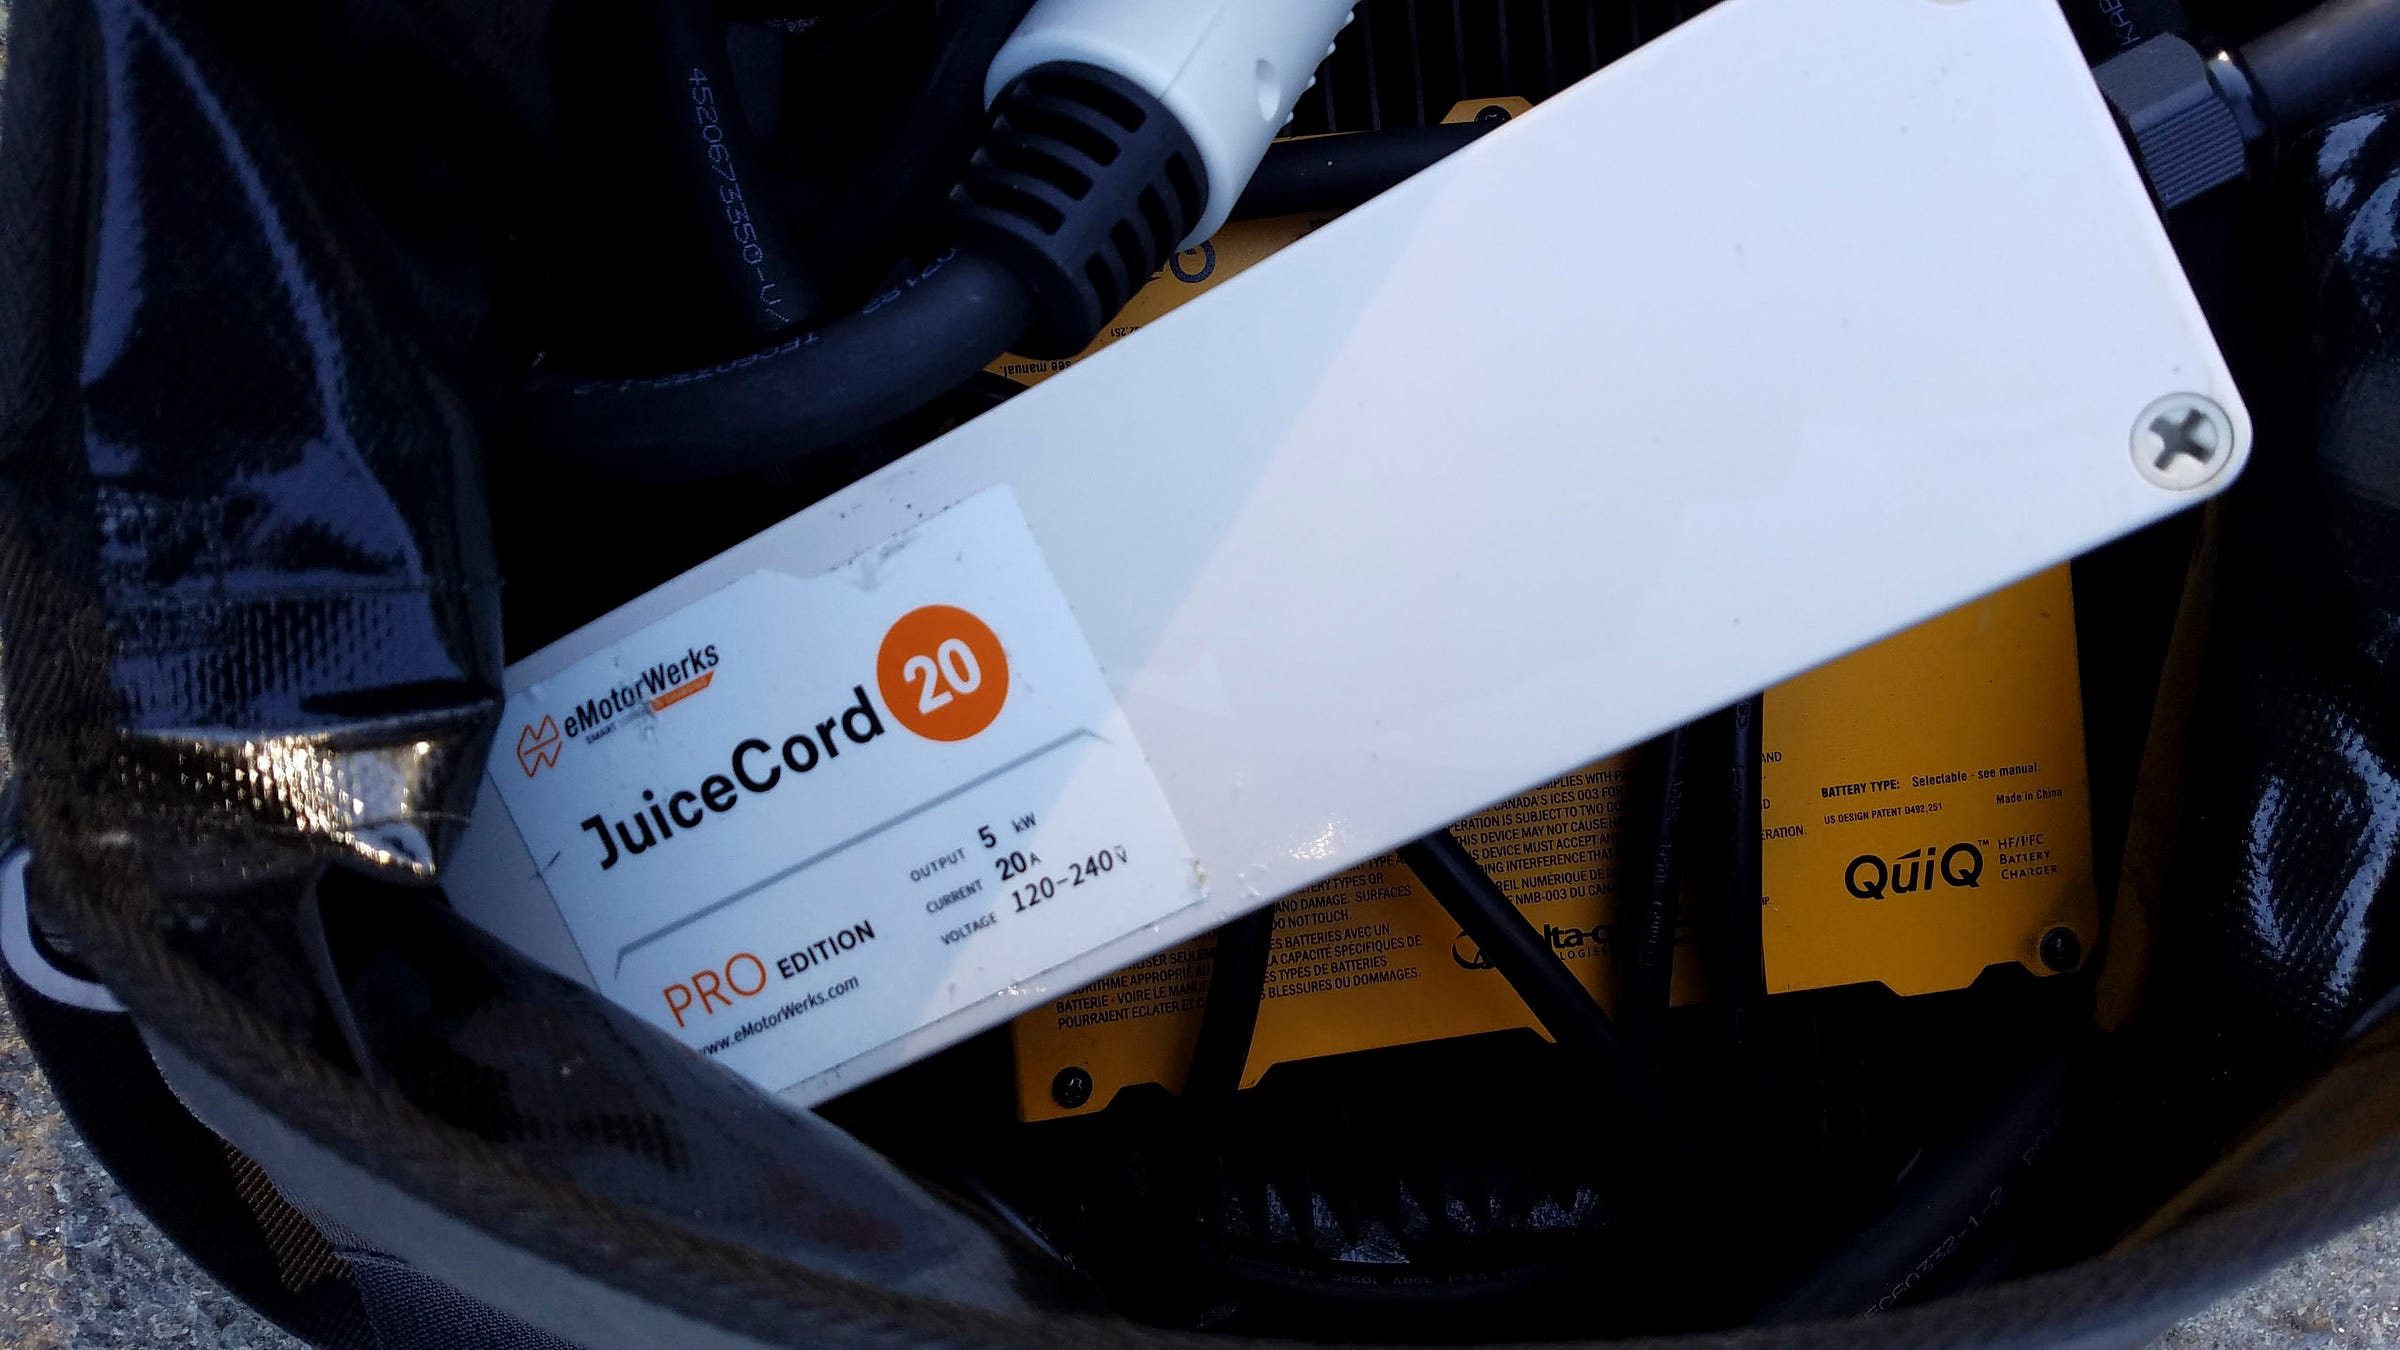 Closeup photo of a black waterproof duffle bag. The bag is open, revealing an orange box with the label "QuiQ" in the bottom of the bag and a white box with the label "eMotorWerks JuiceCord 20 PRO Edition". At the top of the photo is a white connector for an EV charging station.